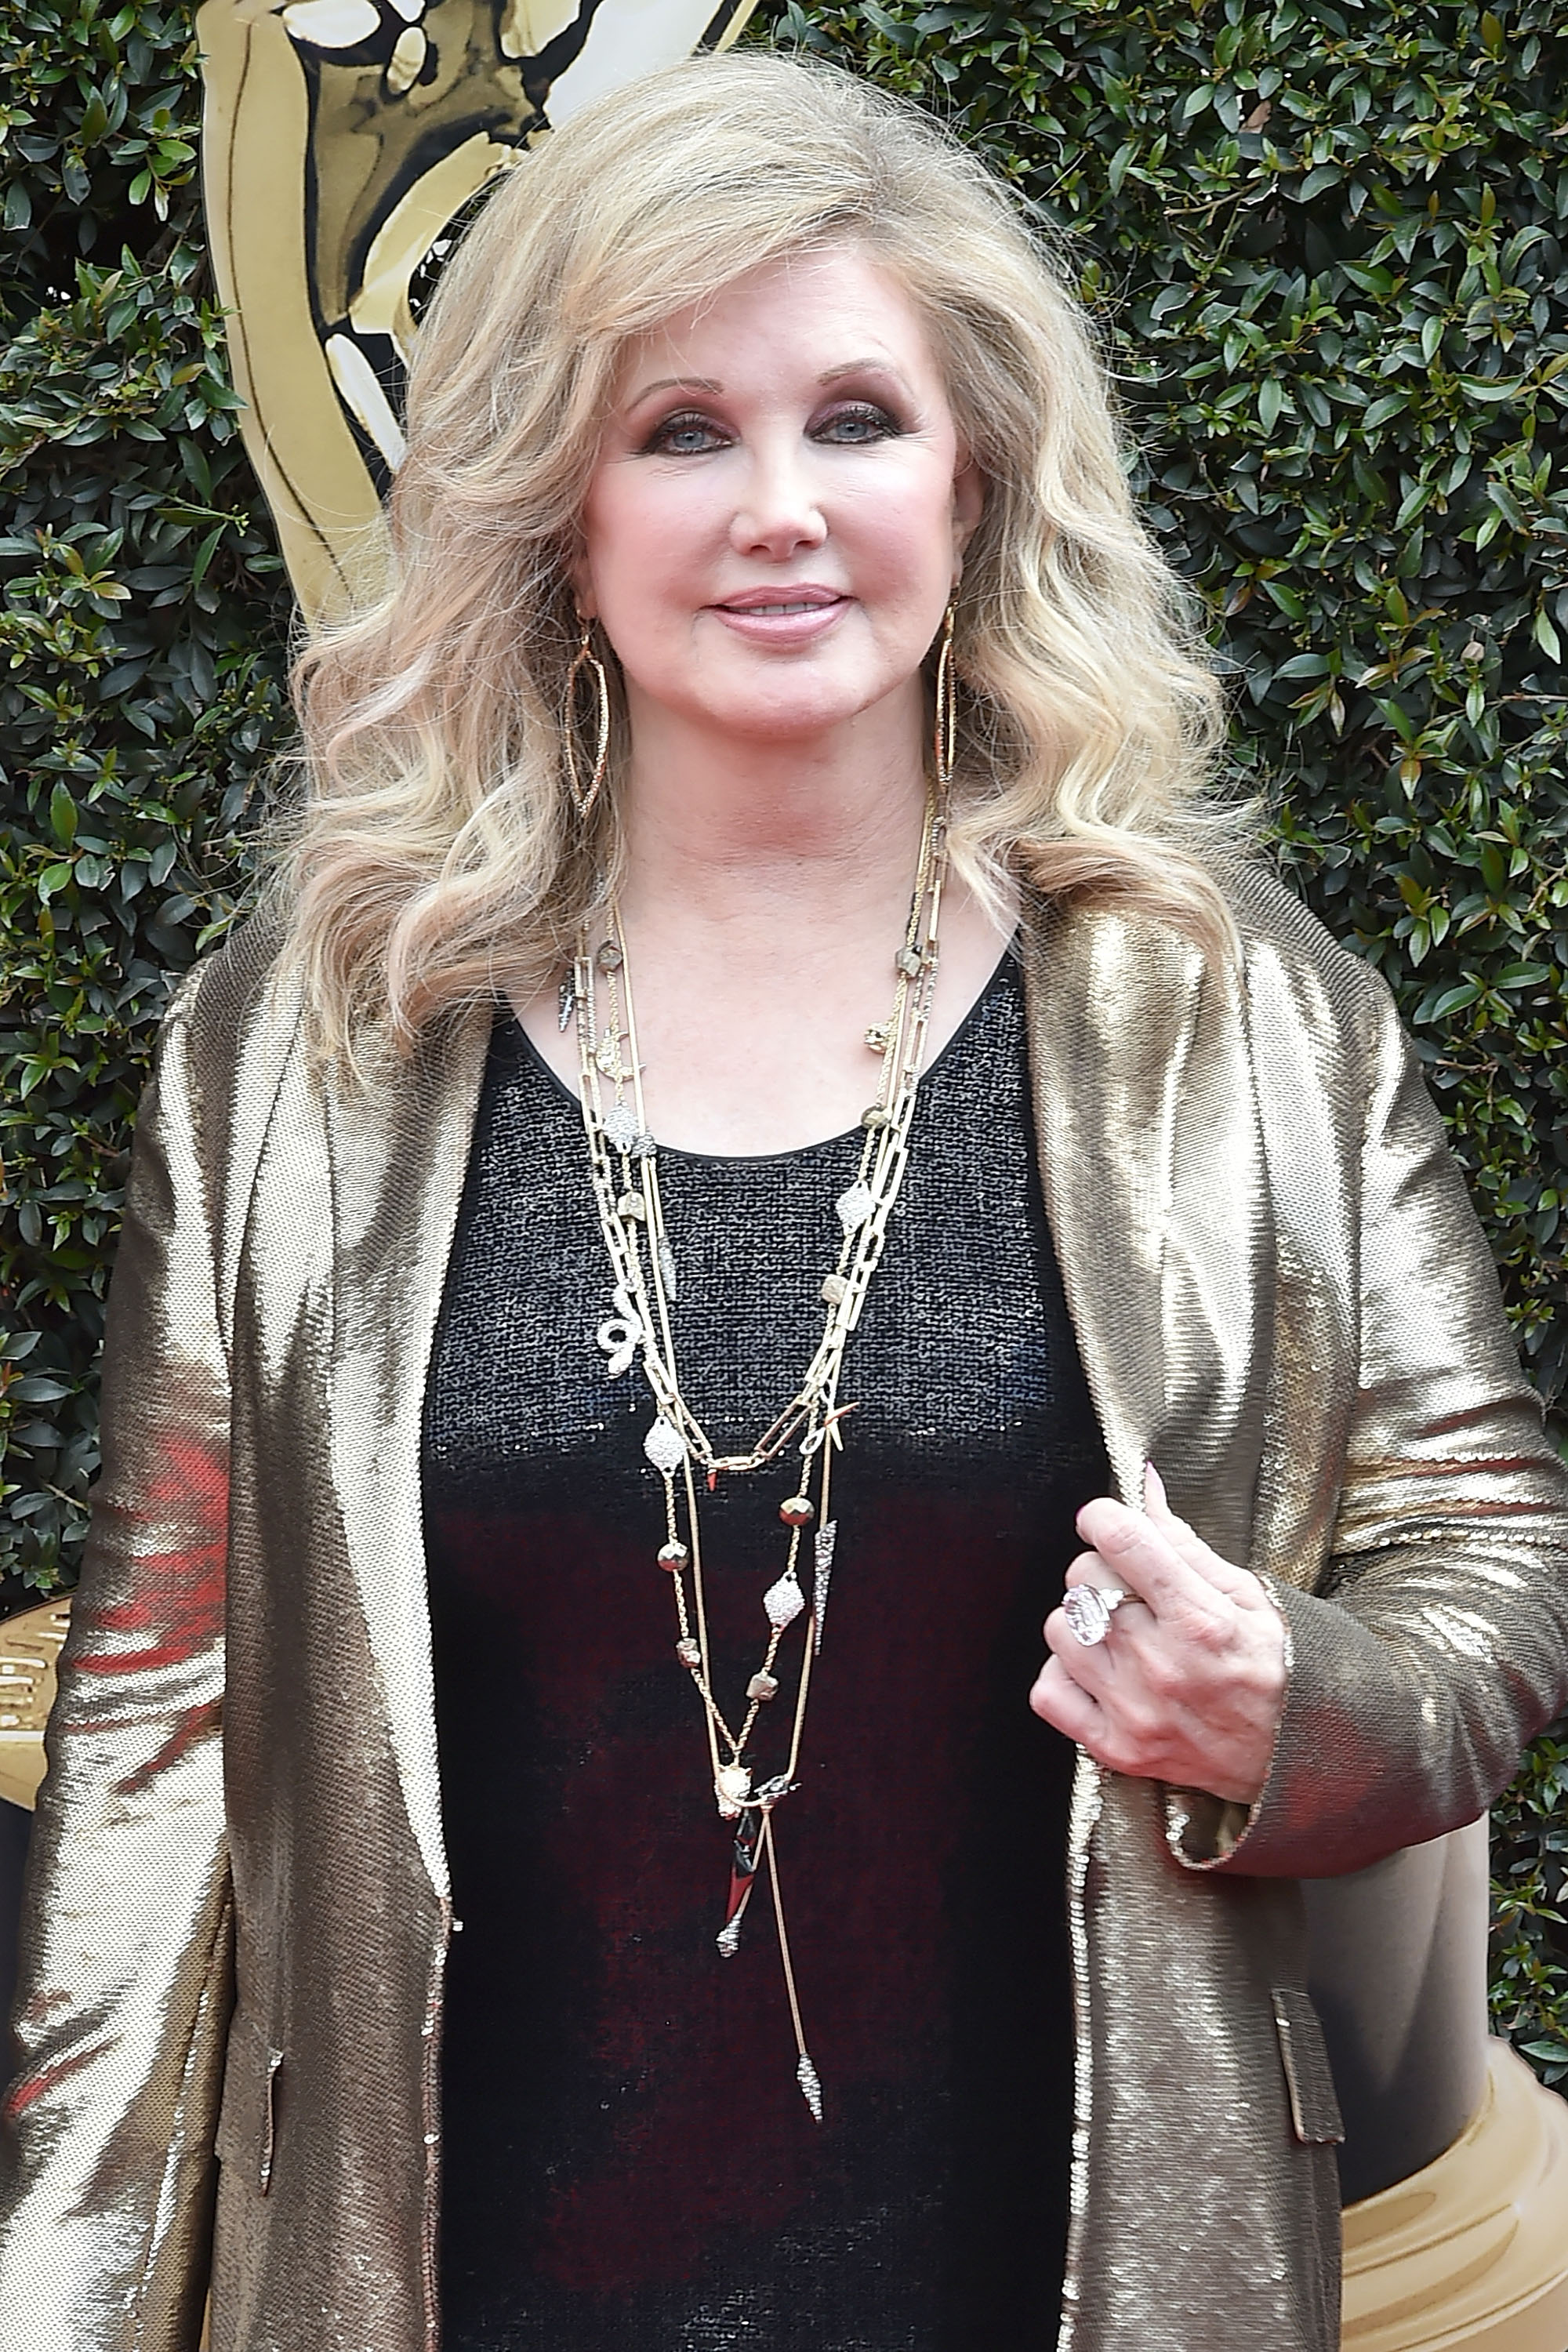 Morgan Fairchild attends the 2018 Daytime Emmy Awards Arrivals at Pasadena Civic Auditorium on April 29, 2018 | Photo: GettyImages